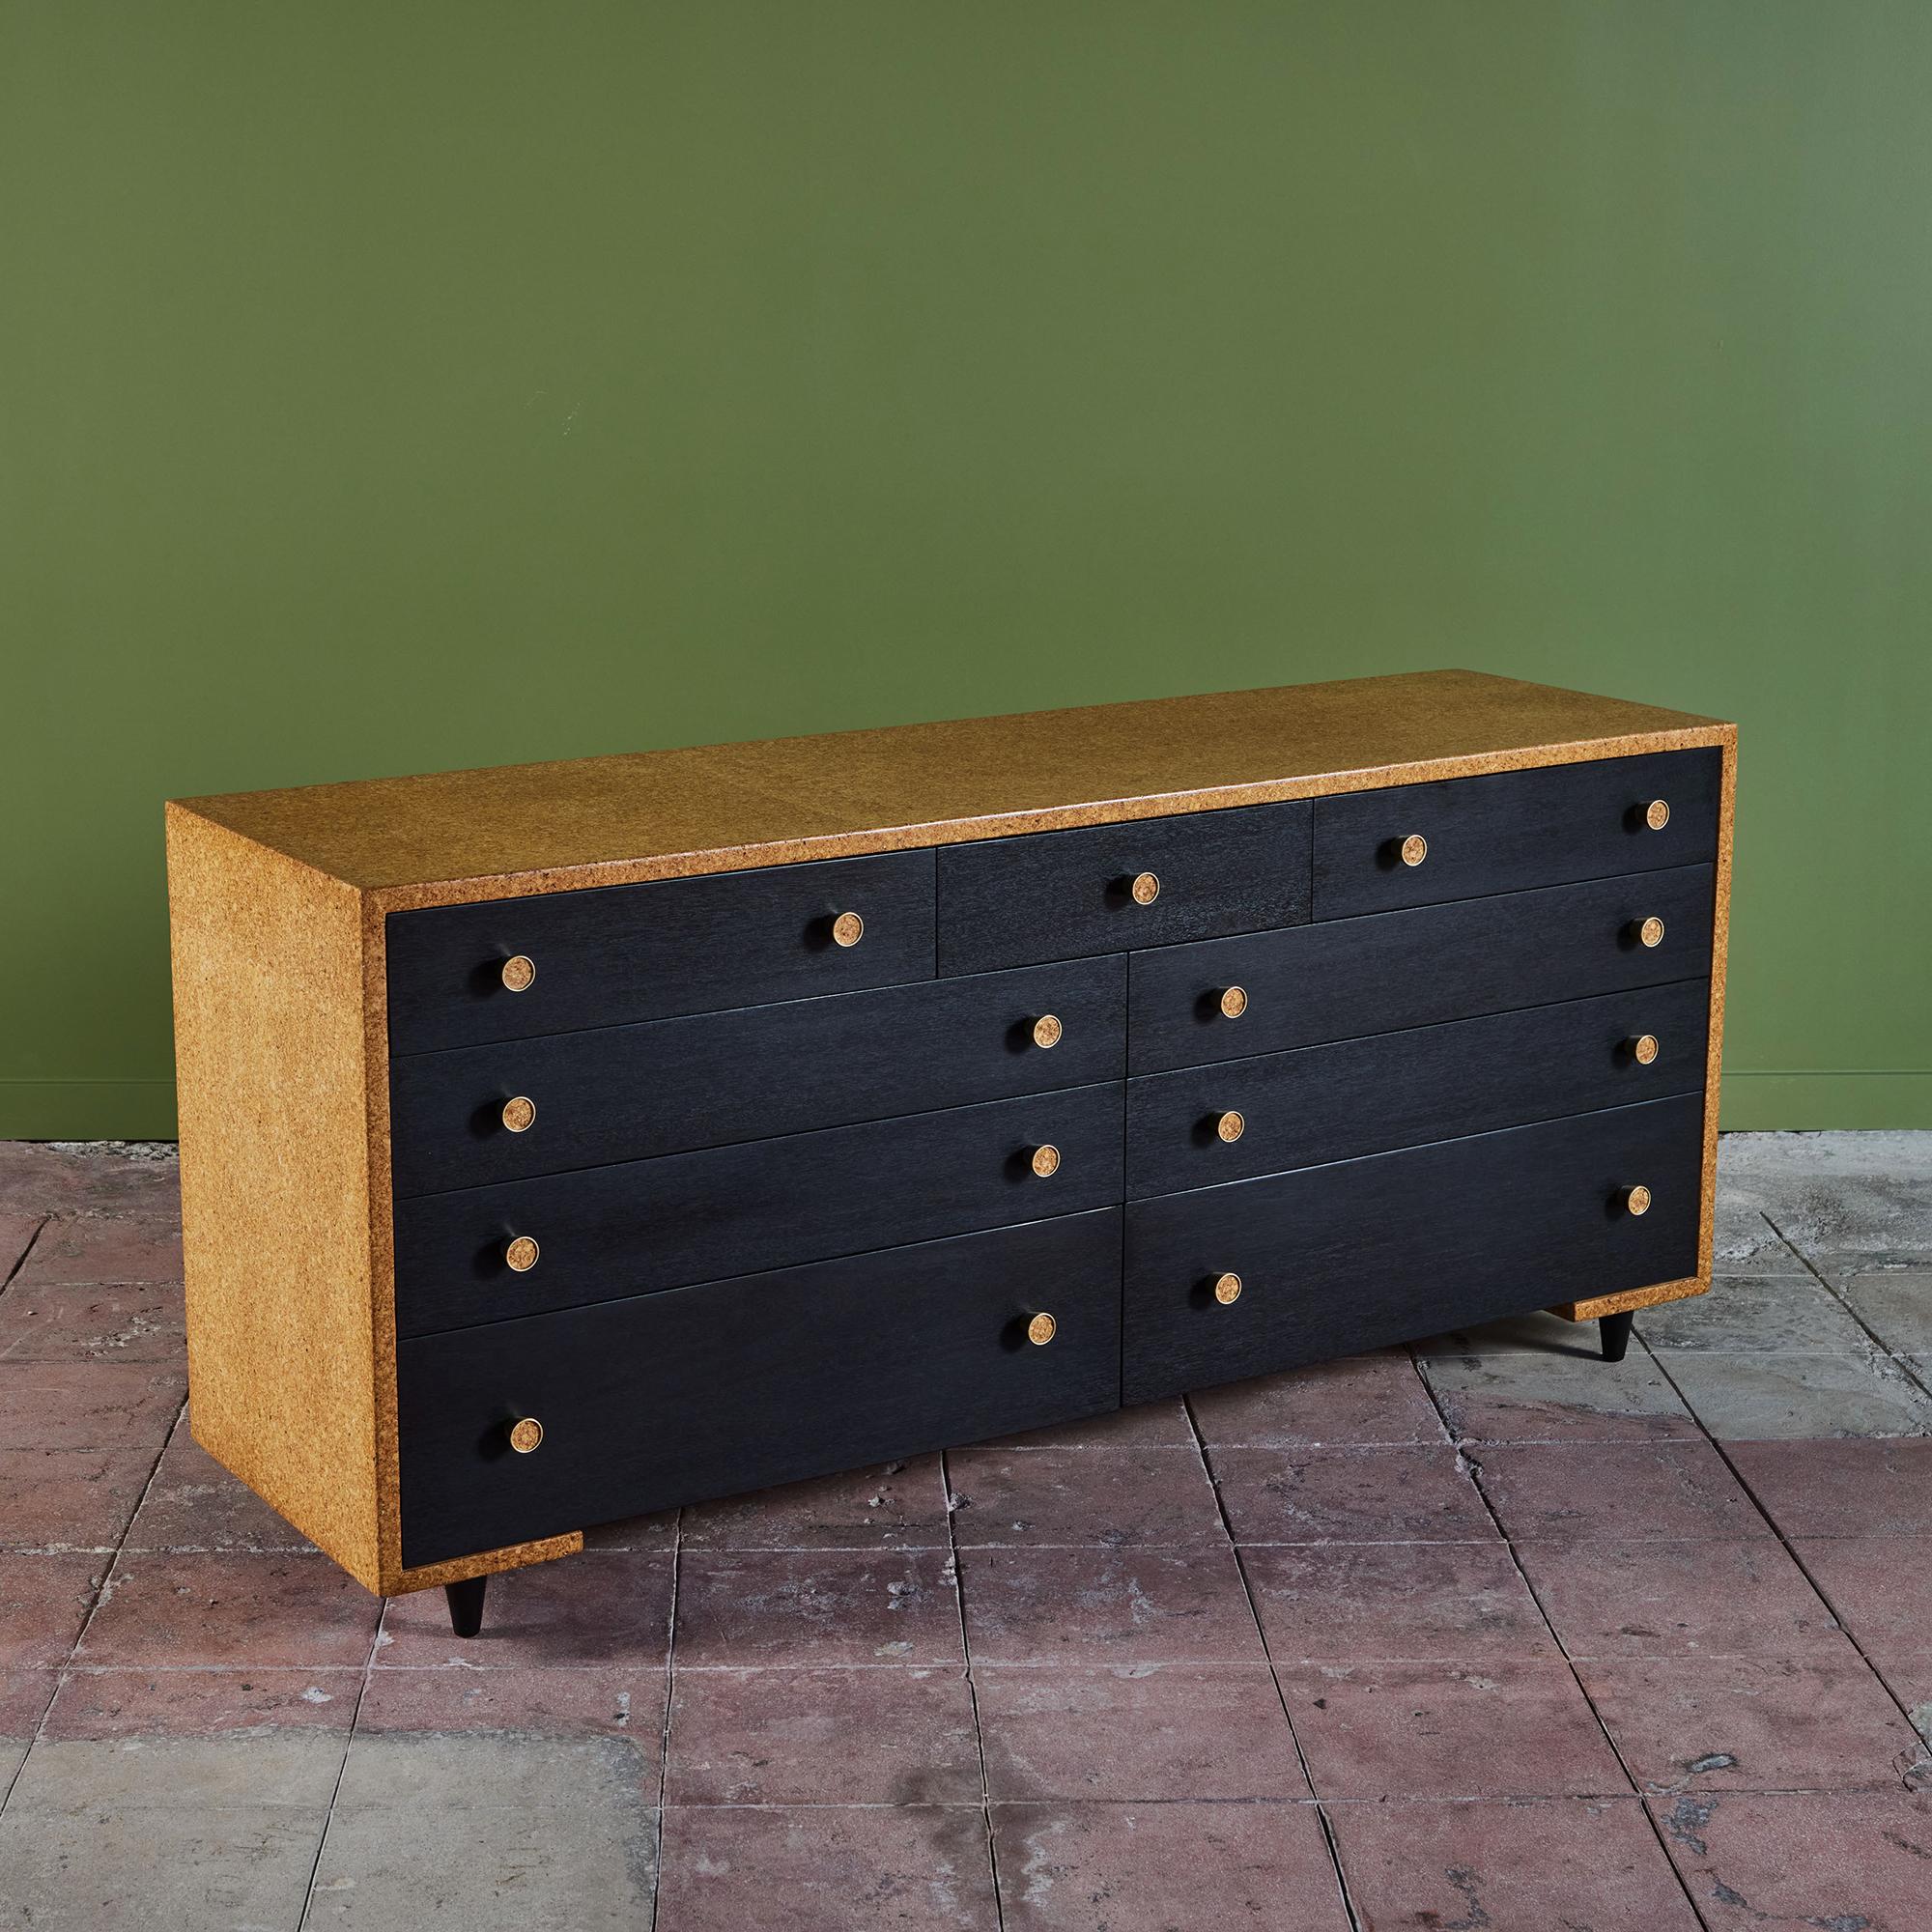 Paul Frankl’s cork furniture pieces are among his longest-lasting contributions to American modernism and are highly sought after to this day. This example, a cork top waterfall edge dresser designed for and produced by Johnson Furniture Co has gone